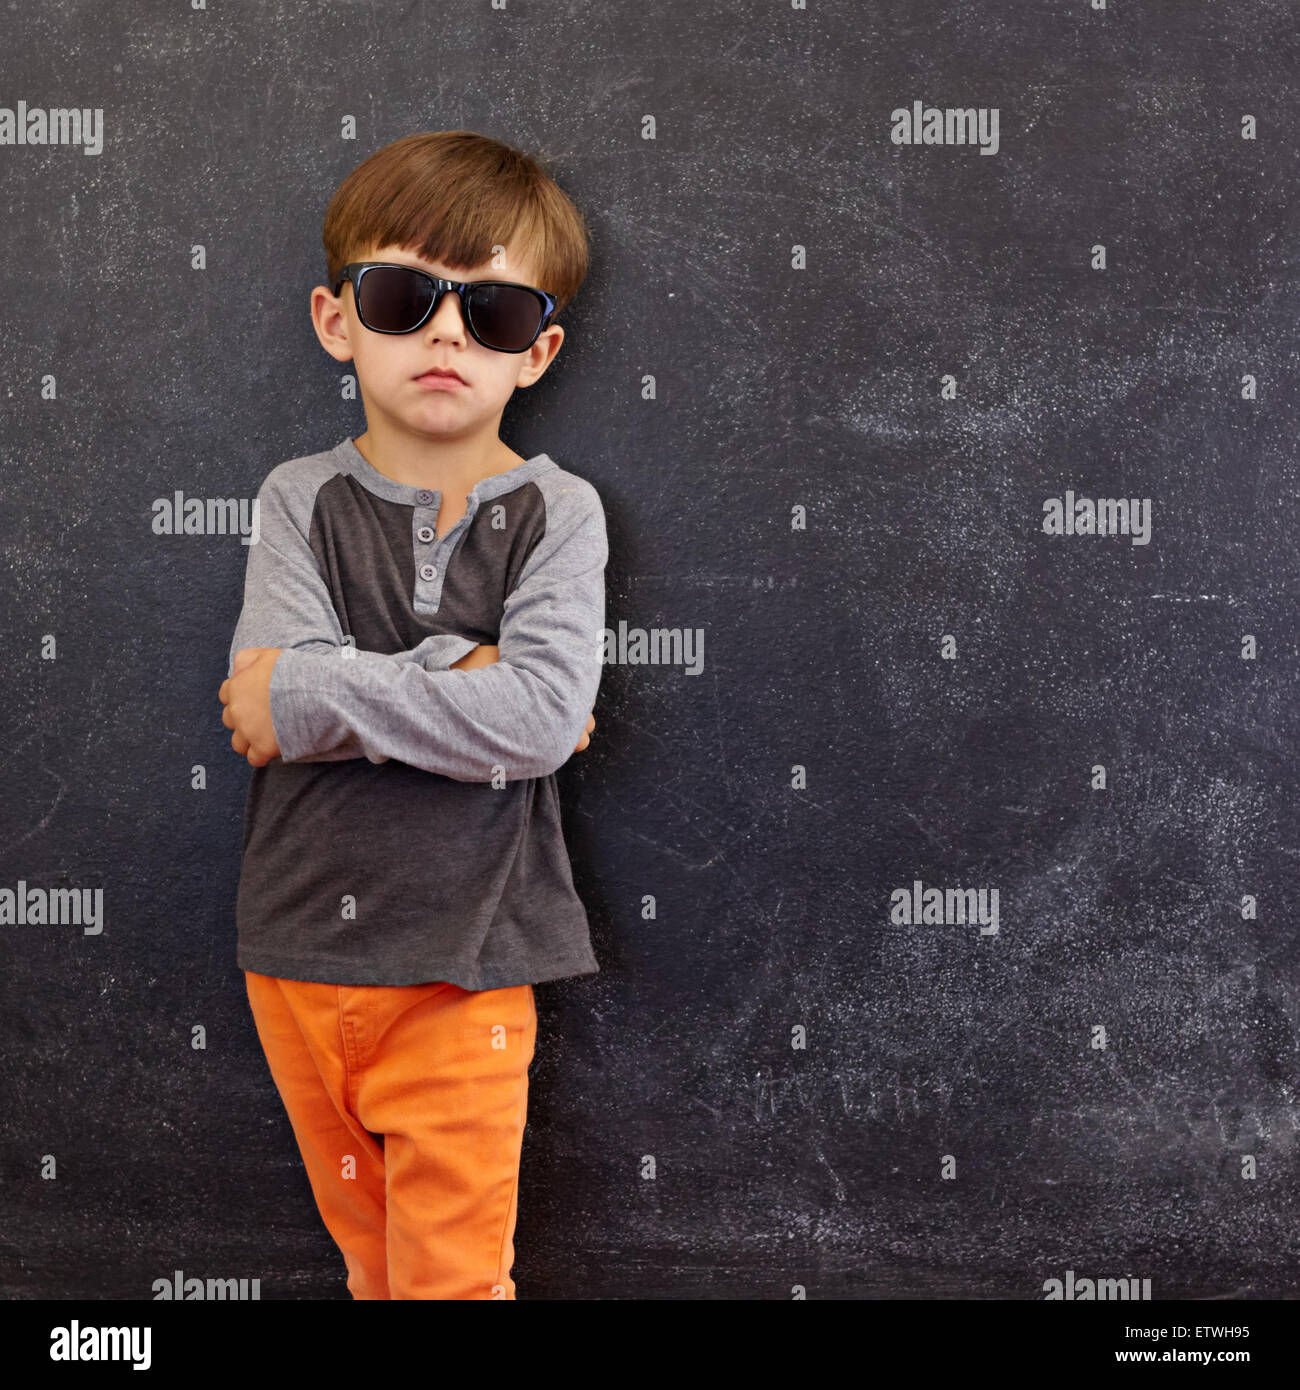 Boy Wearing Sunglasses High Resolution Stock Photography and Images - Alamy